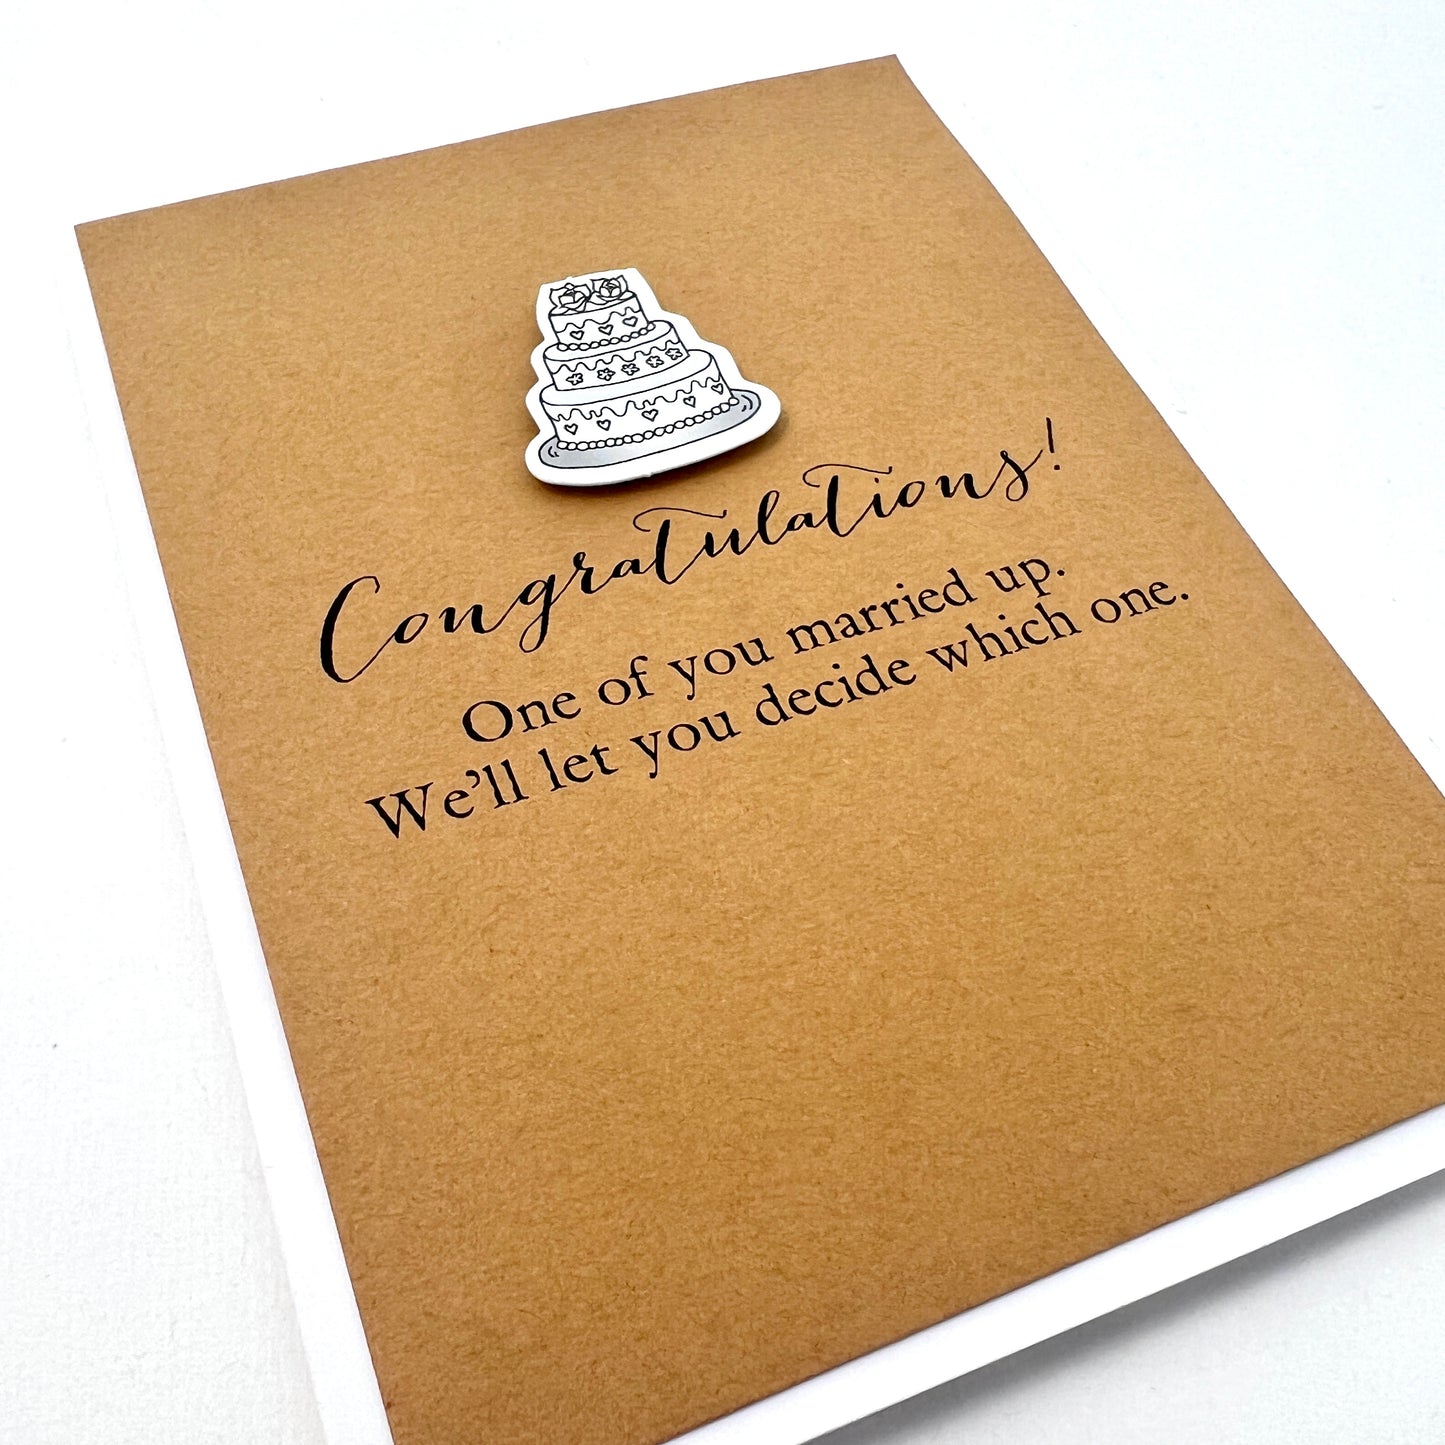 One of You Married Up card